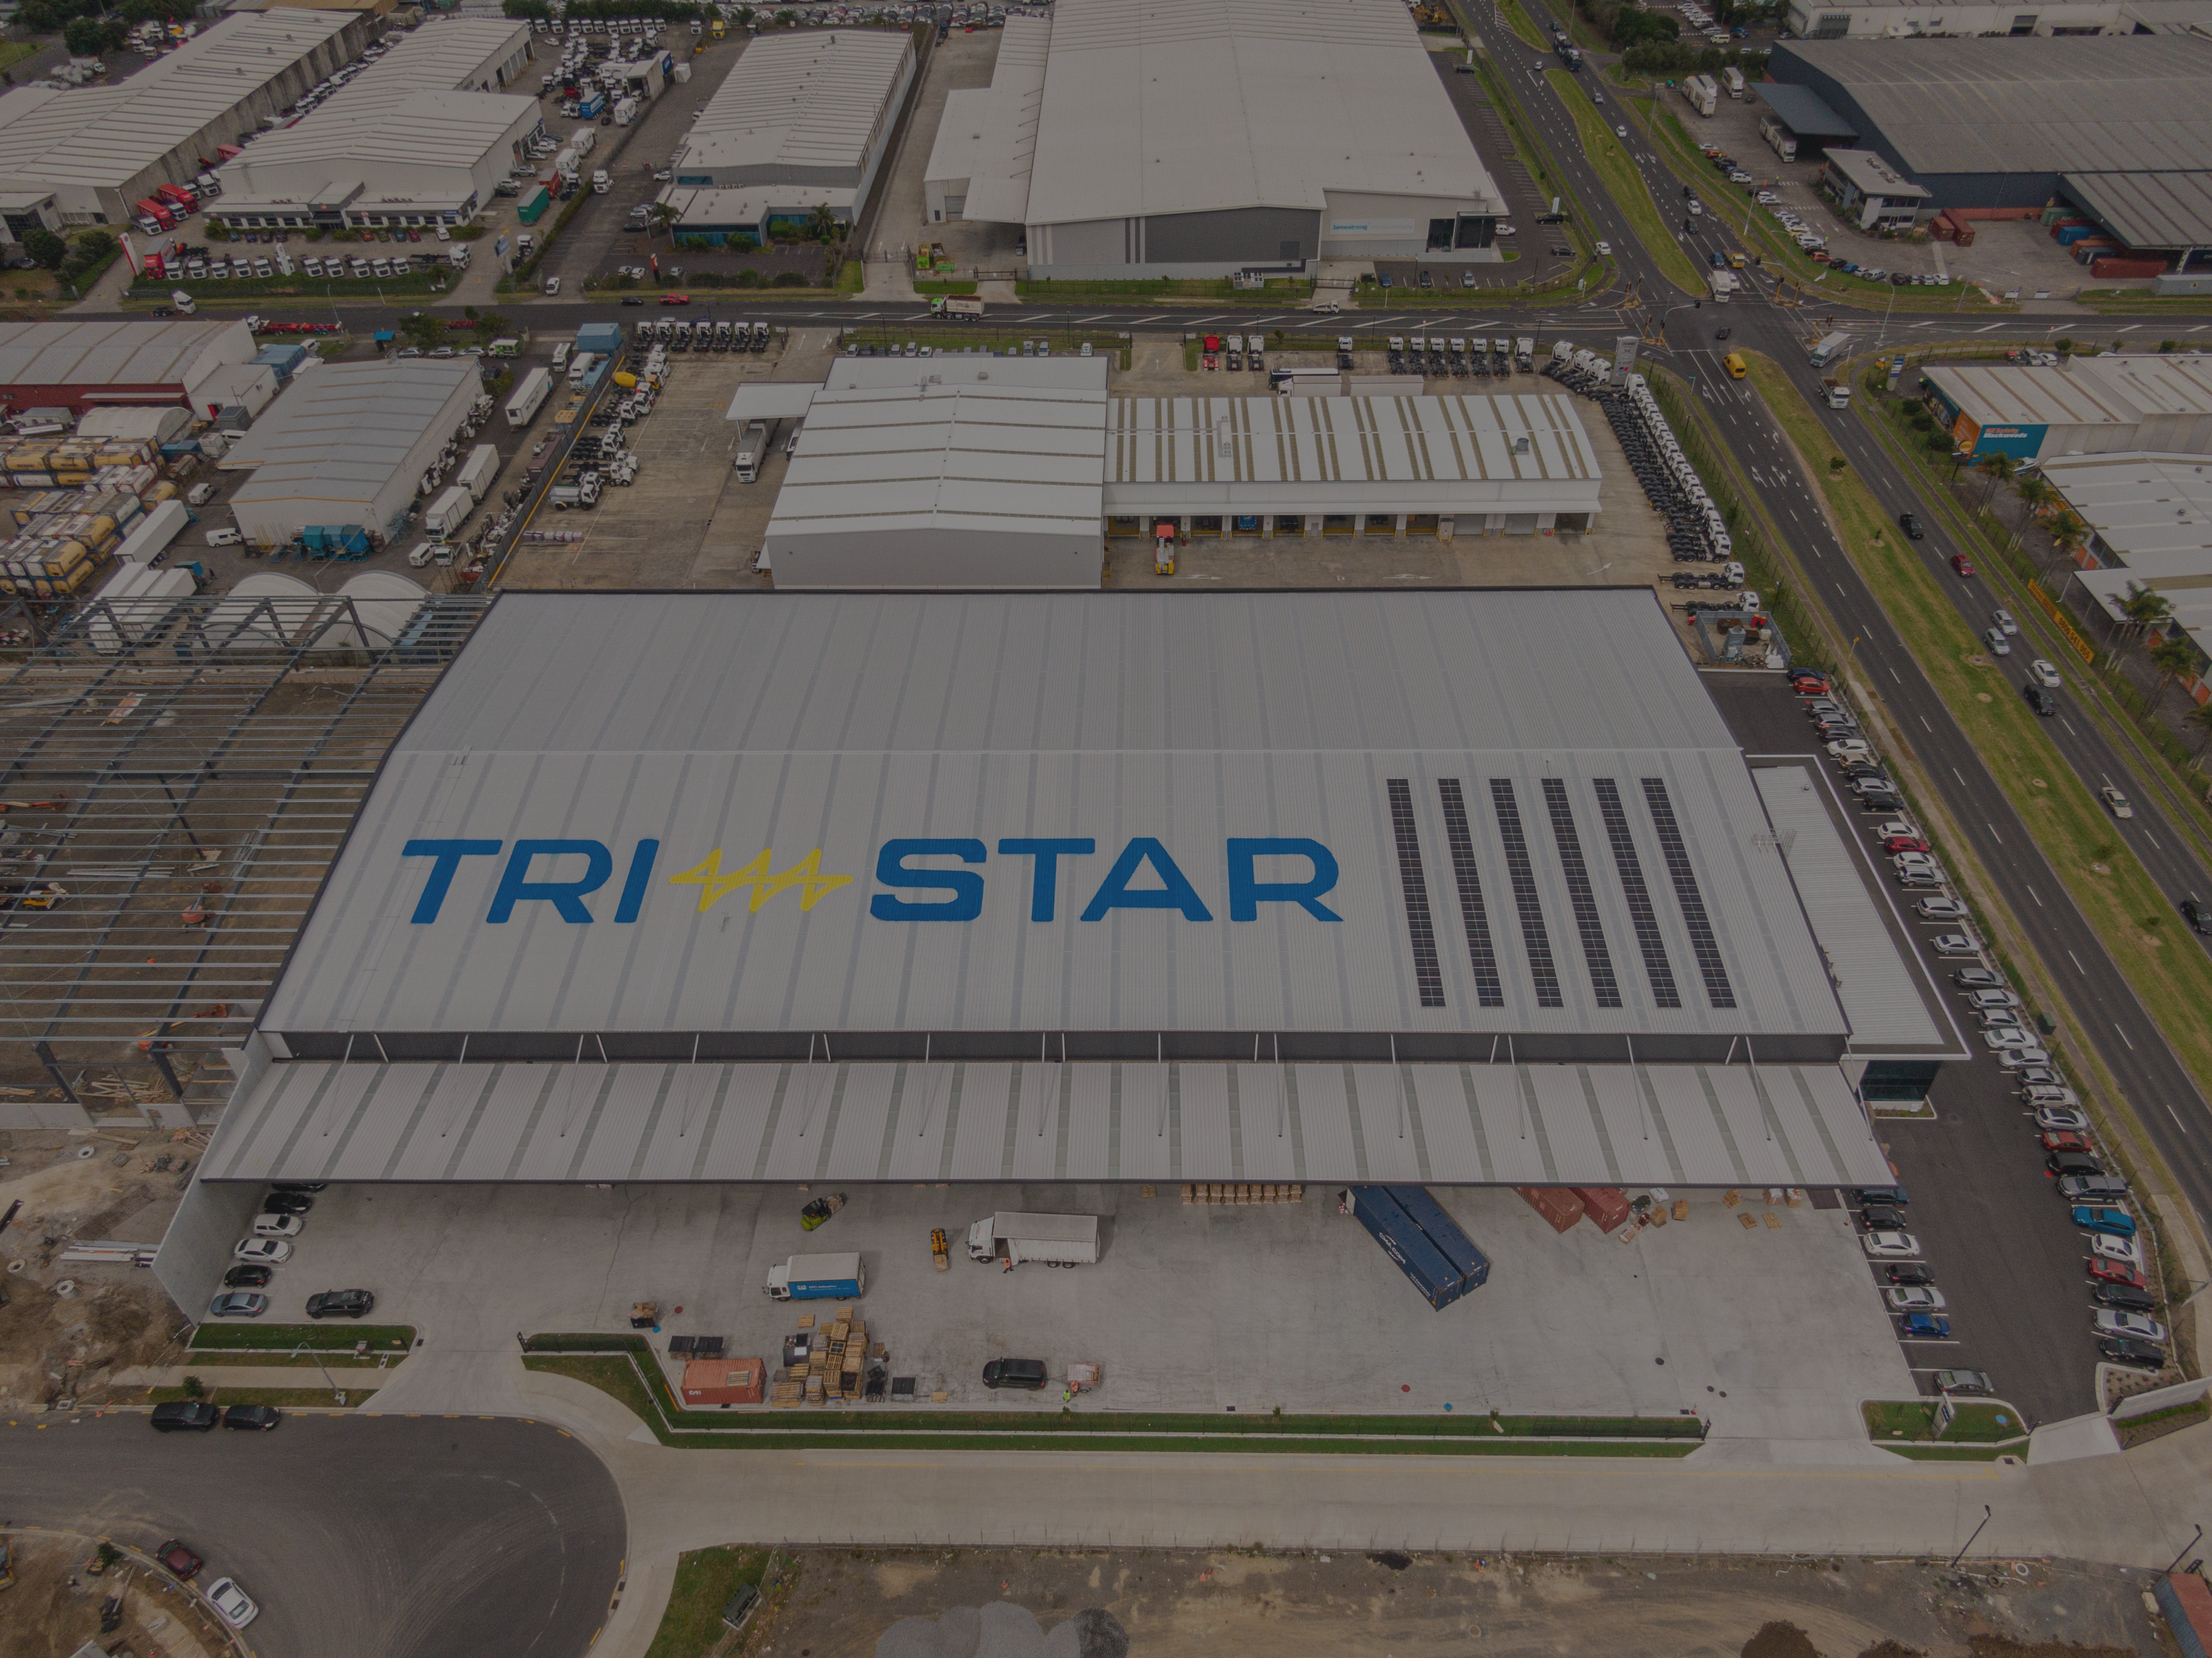 Tri-Star’s integration story: Building a competitive edge with Crossfire